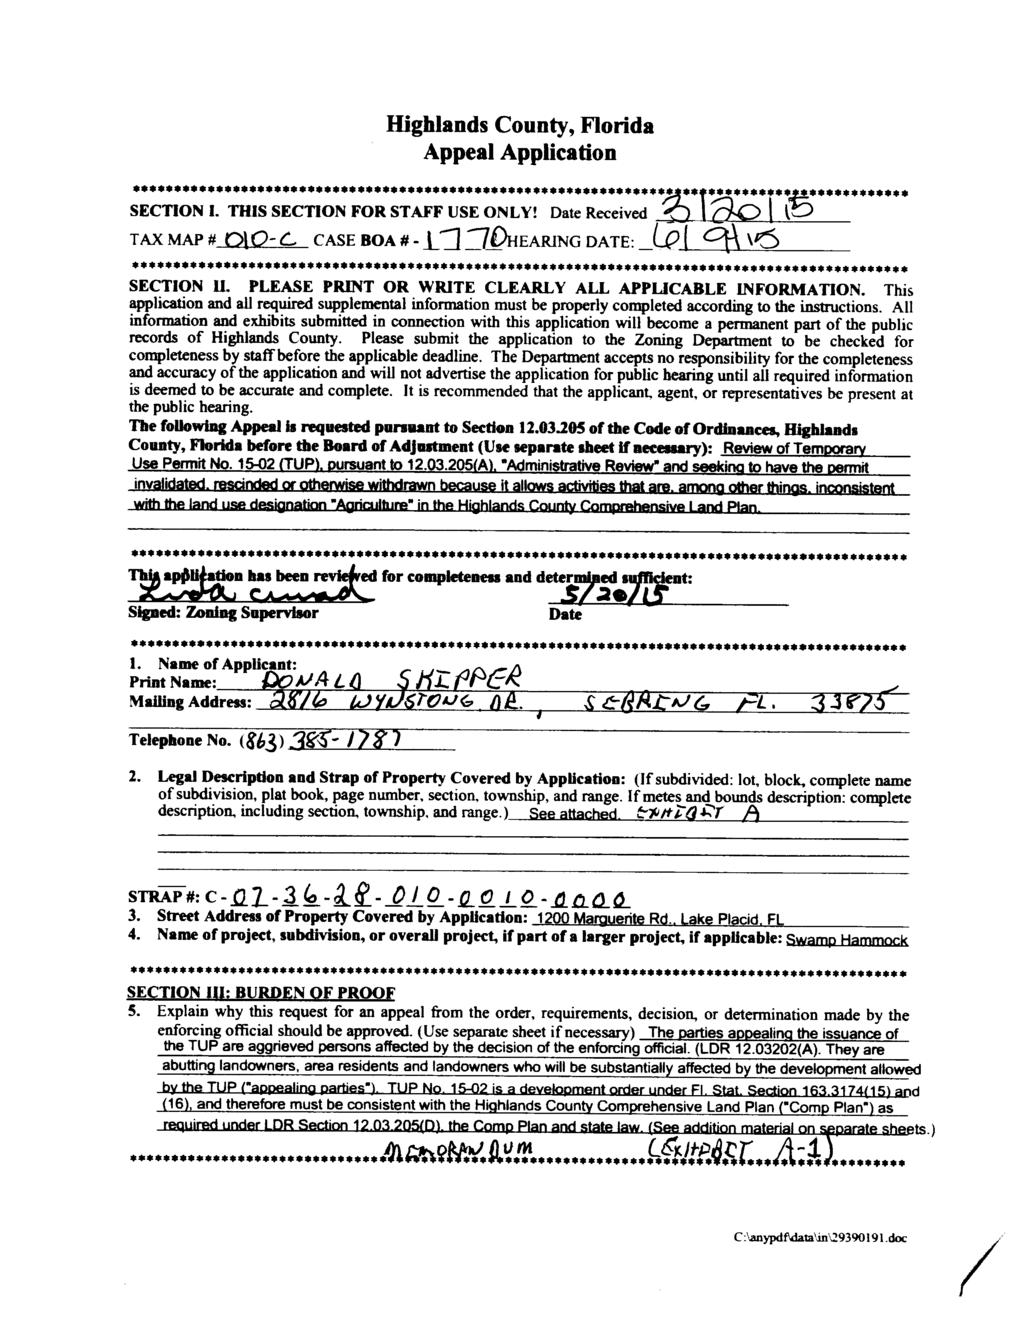 Highlands County, Florida Appeal Application...... ~ SECTION I. THIS SECTION FOR STAFF USE ONLY! Date Received lo TAXMAP# 0\0-C.. CASEBOA#-_l_':J(DHEARINGDATE:_(jJI q\ V6 SECTION 11.